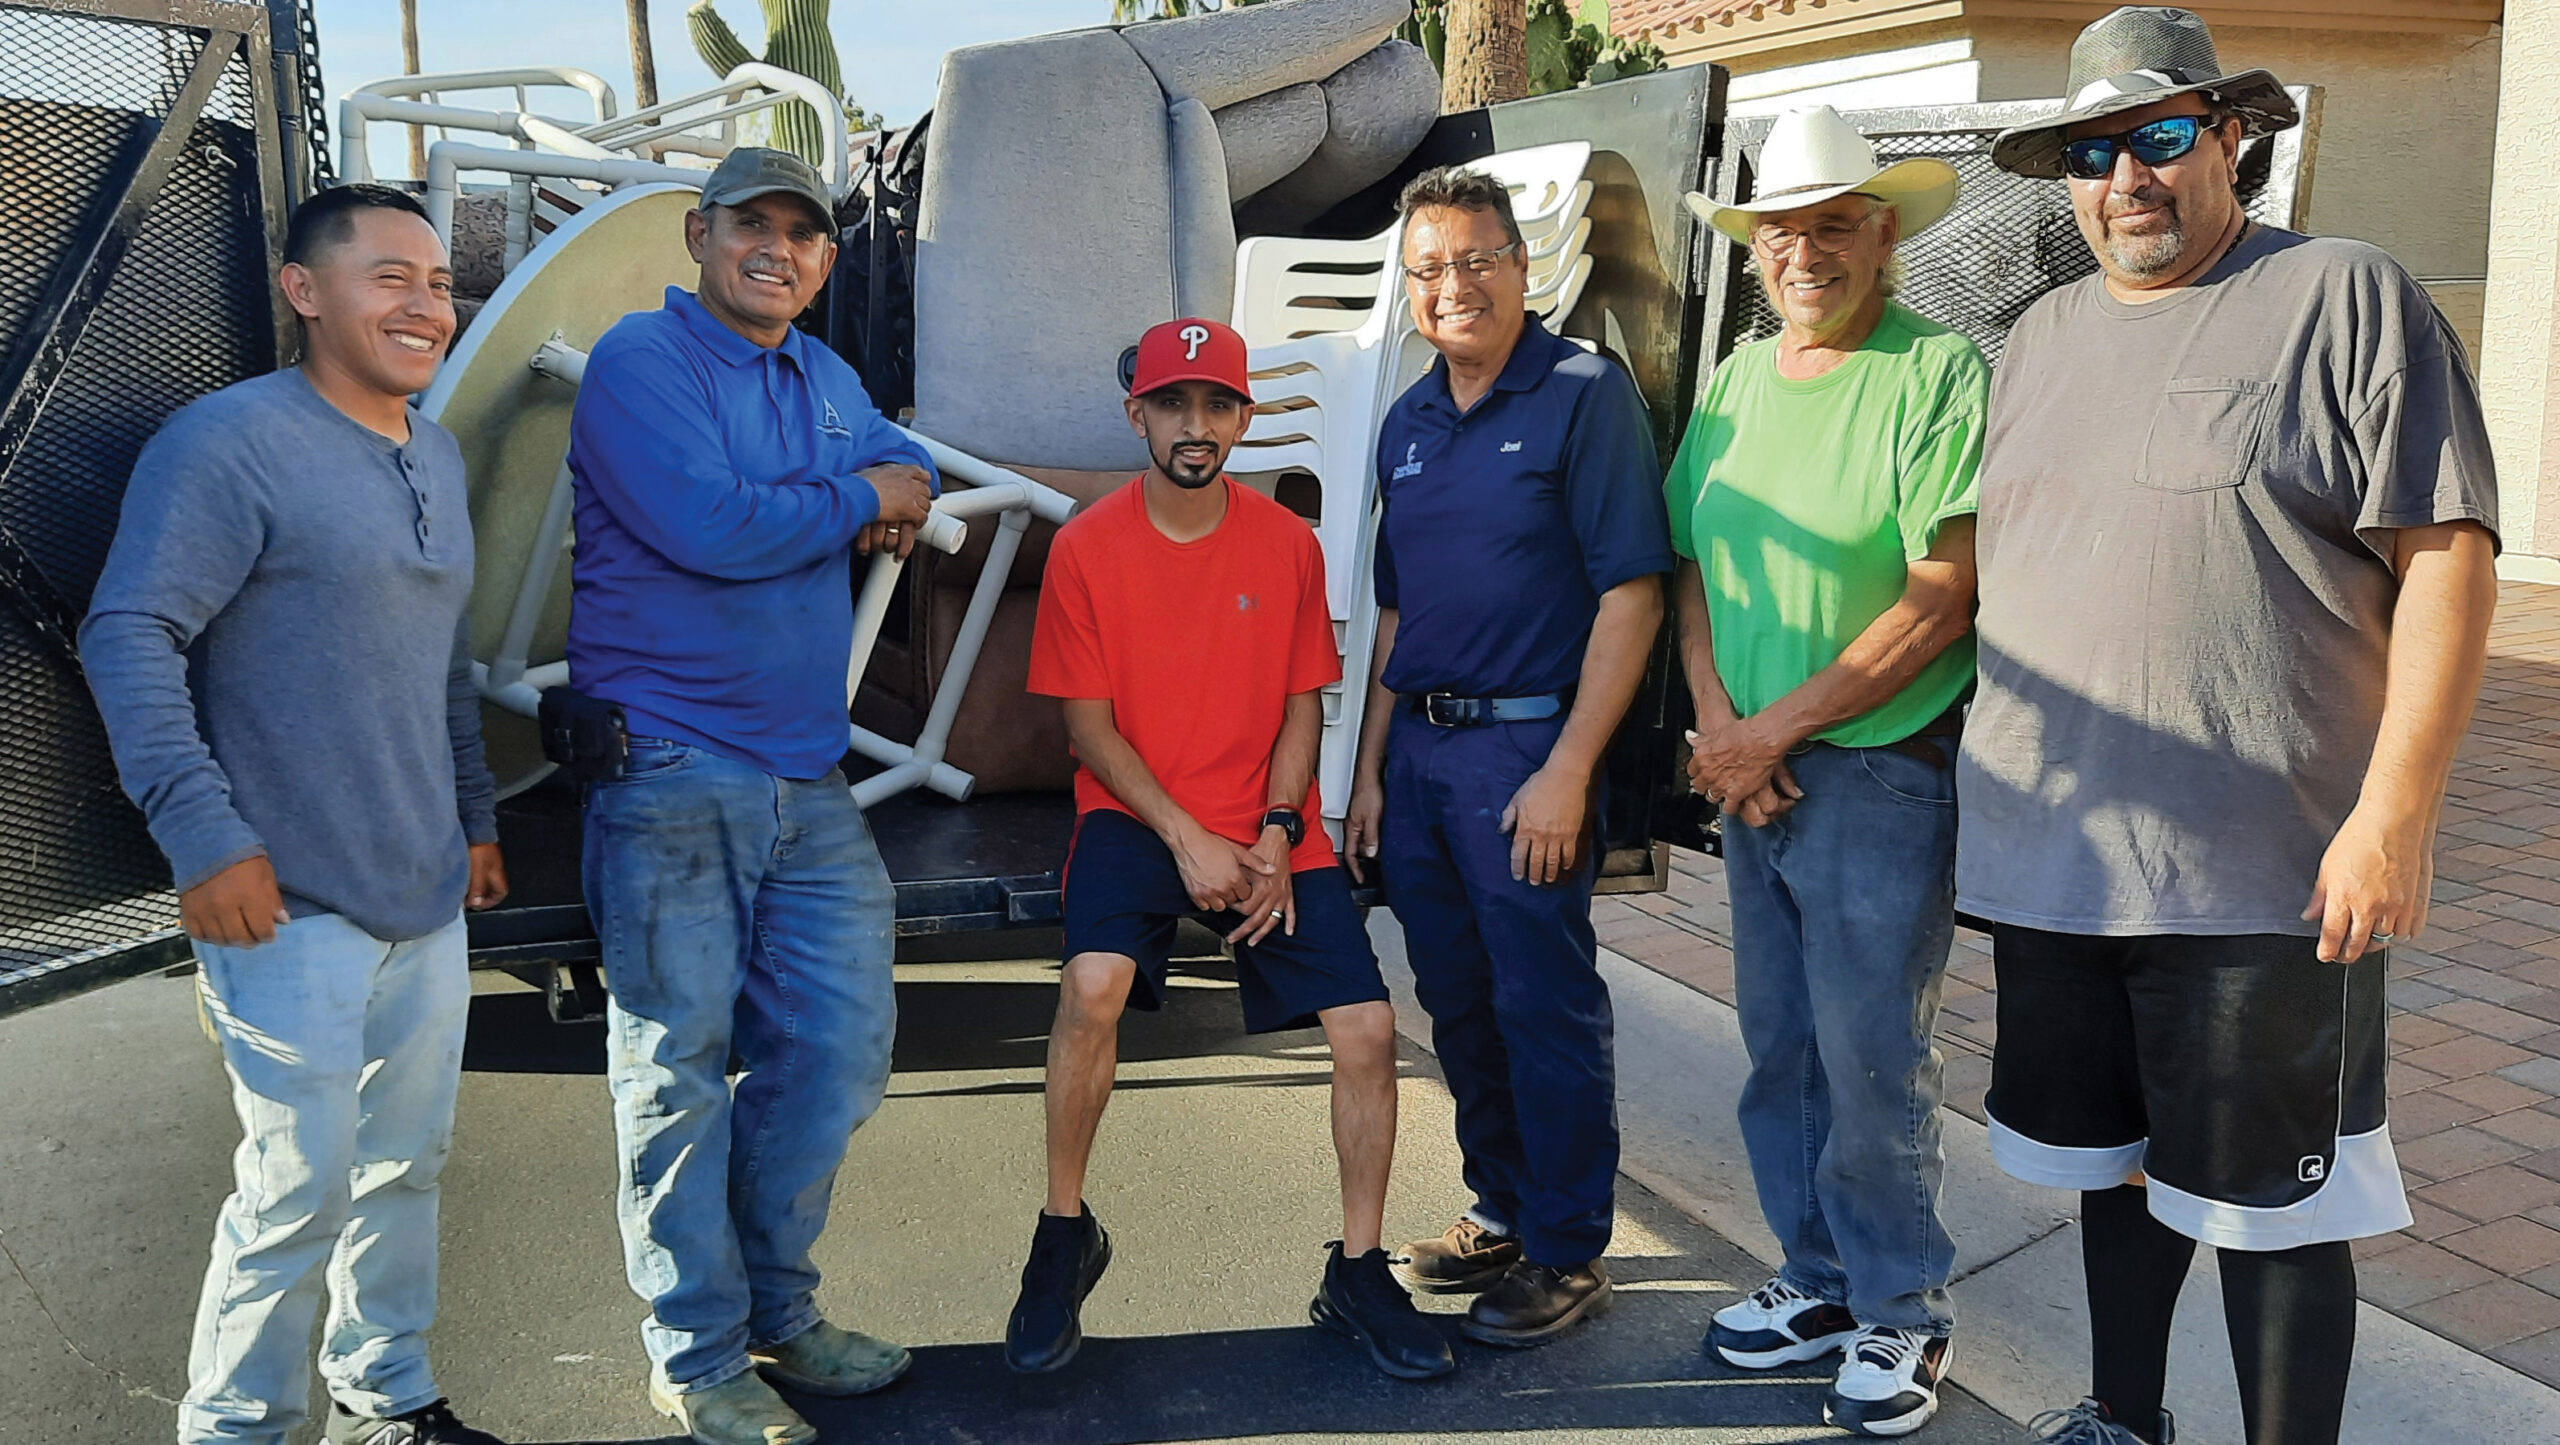 Volunteers from the Latin American Church of the Nazarene who came by to collect the furniture on the last day.